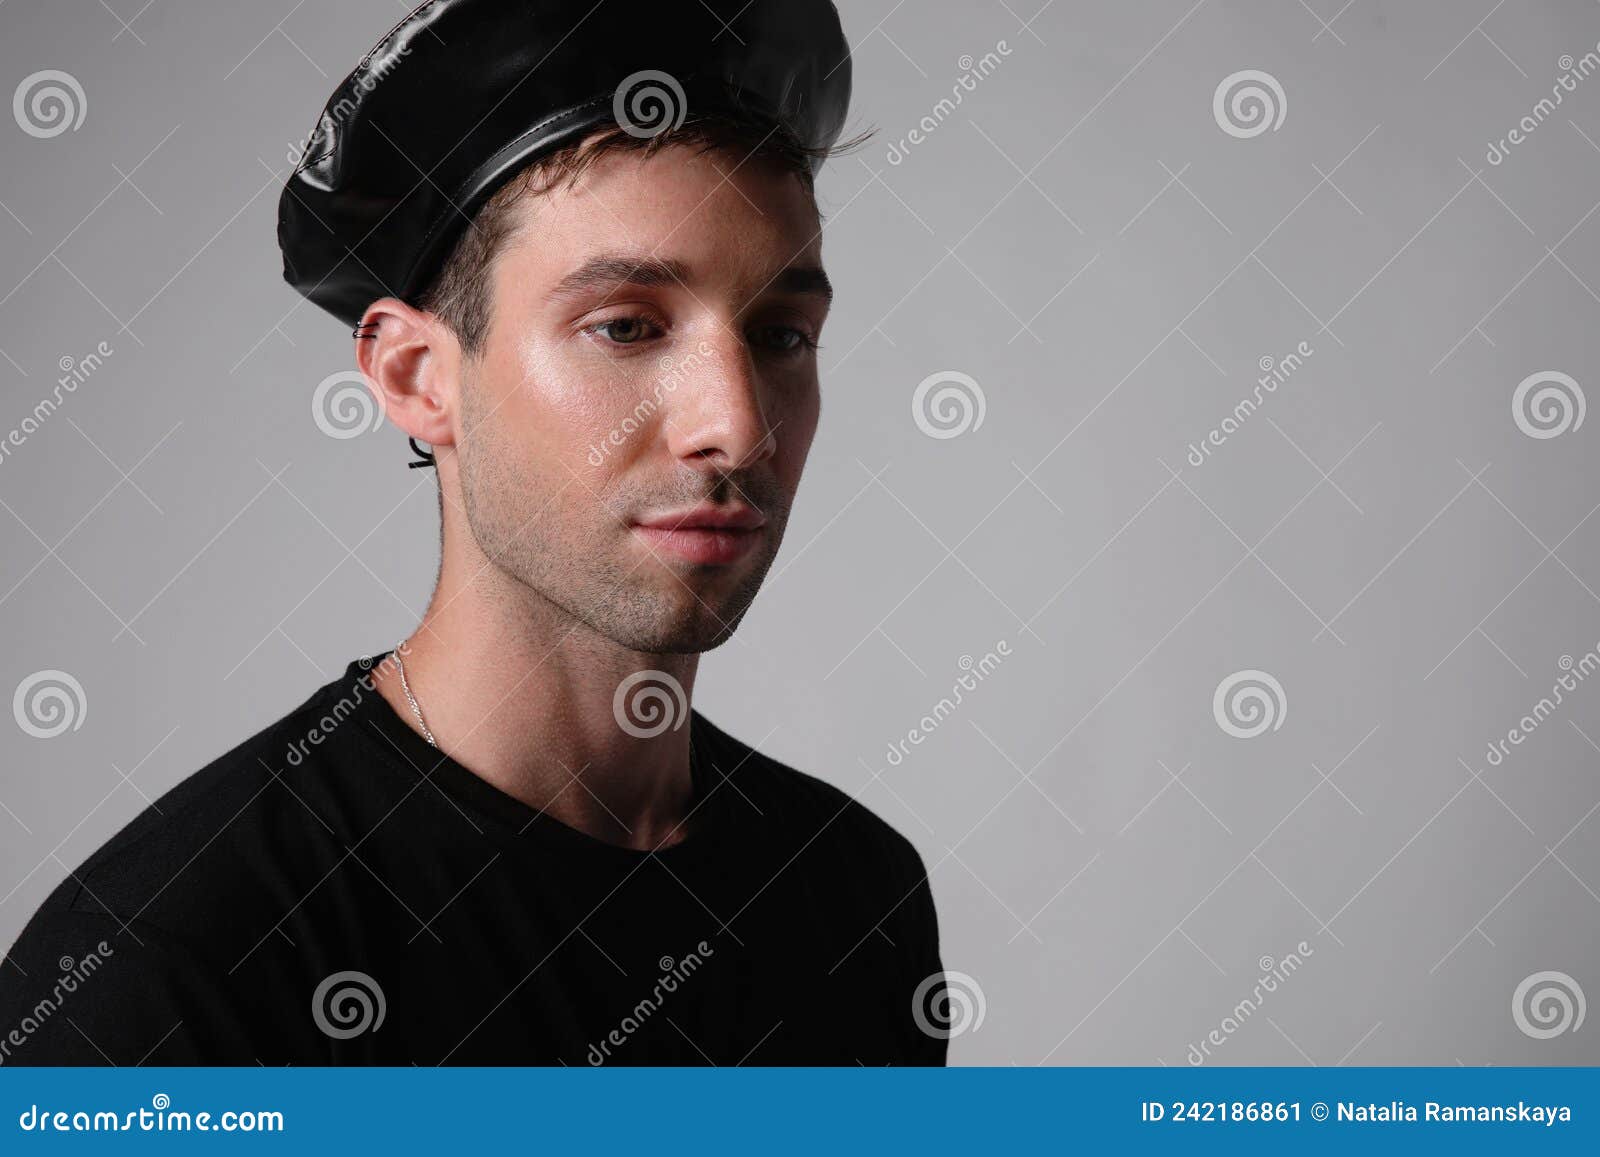 handsome man with serious face expression wears black hat over white background.